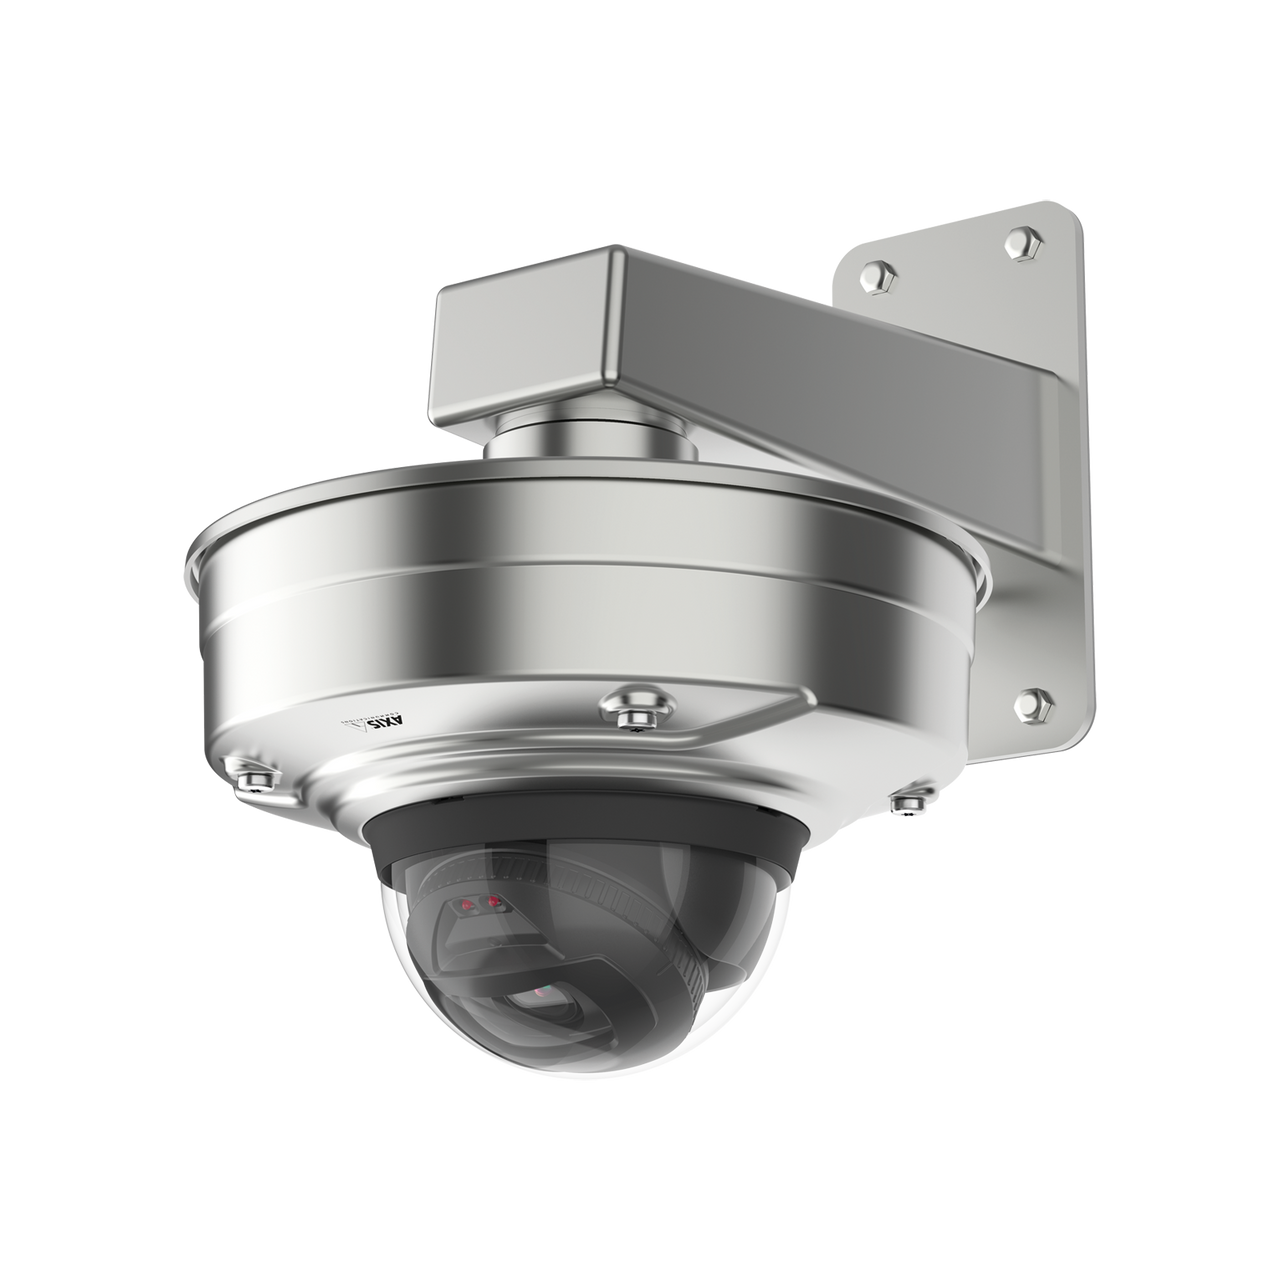 AXIS Q3517-SLVE Stainless steel for solid performance in 5 MP